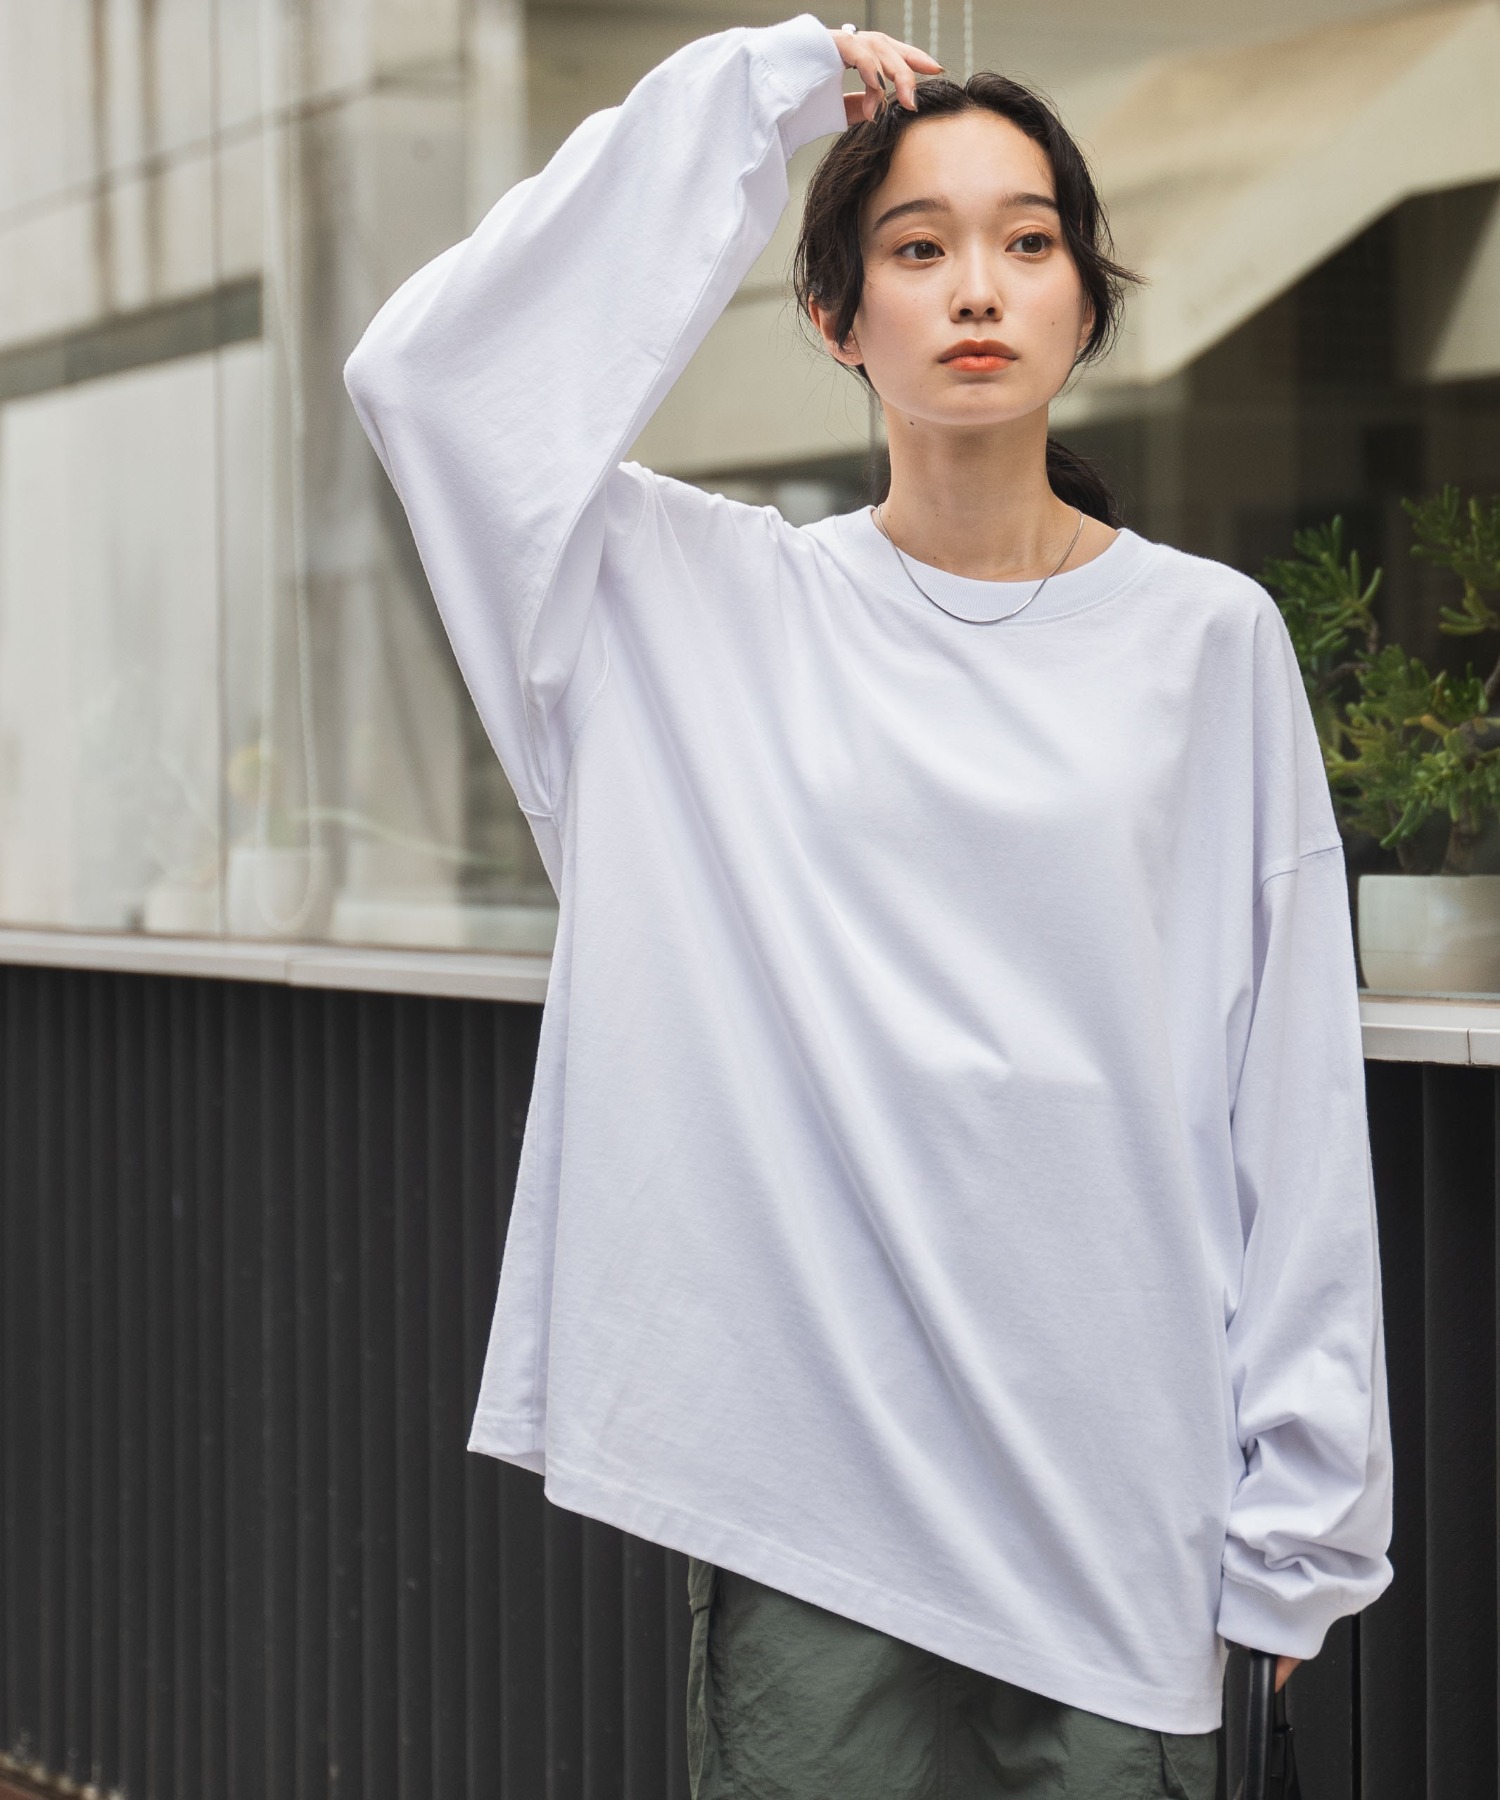 Tシャツ ロンＴ 長袖 100 カットソー 2枚セット 綿 サッカー ロボット